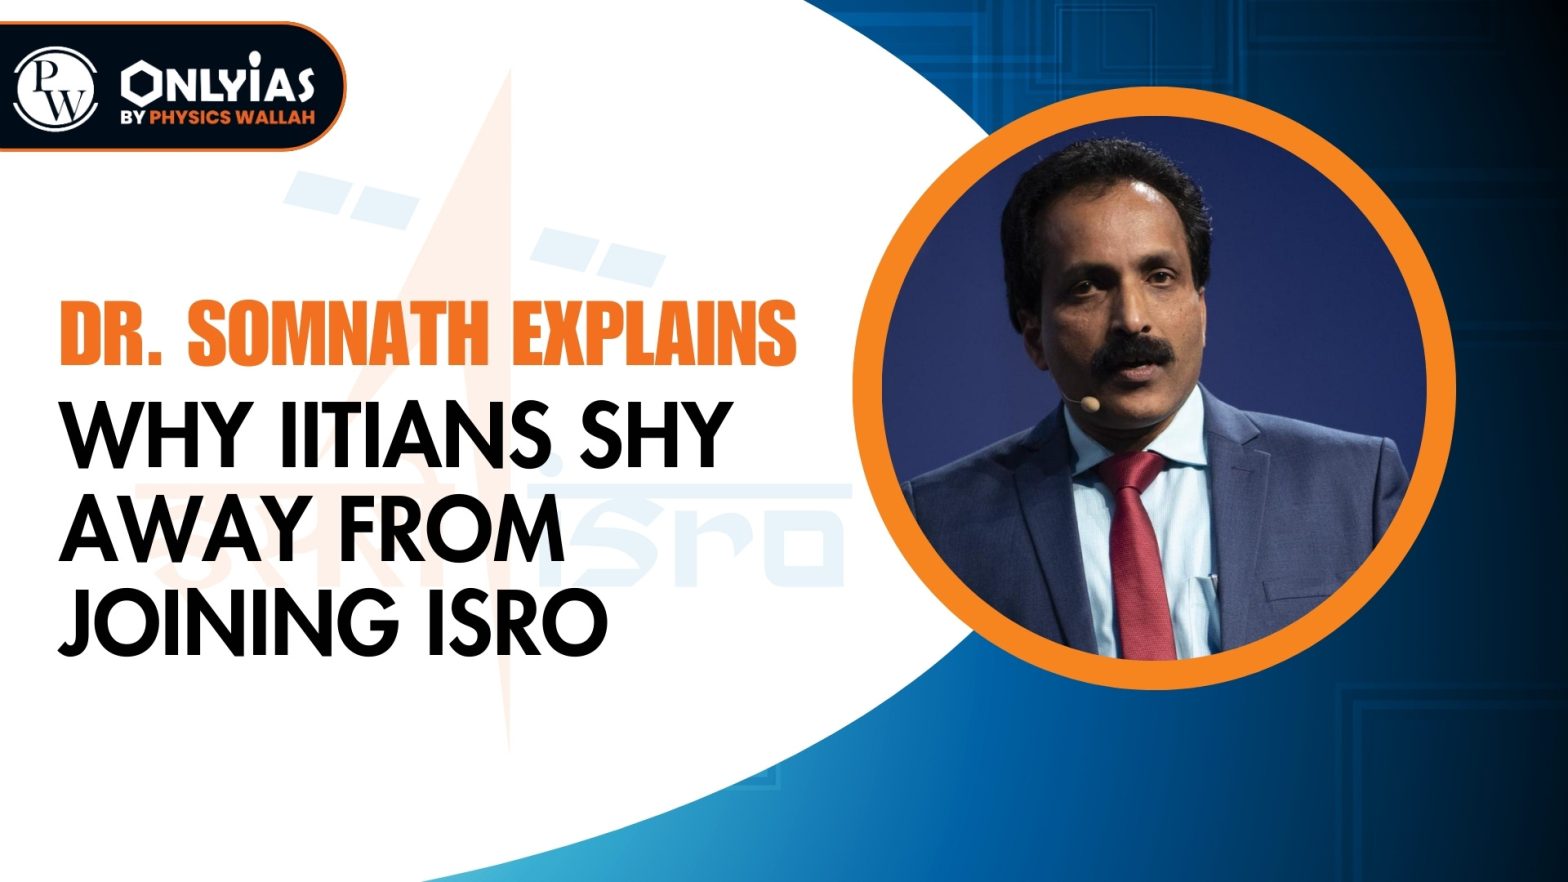 Dr. Somnath Explains Why IITians Shy Away from Joining ISRO